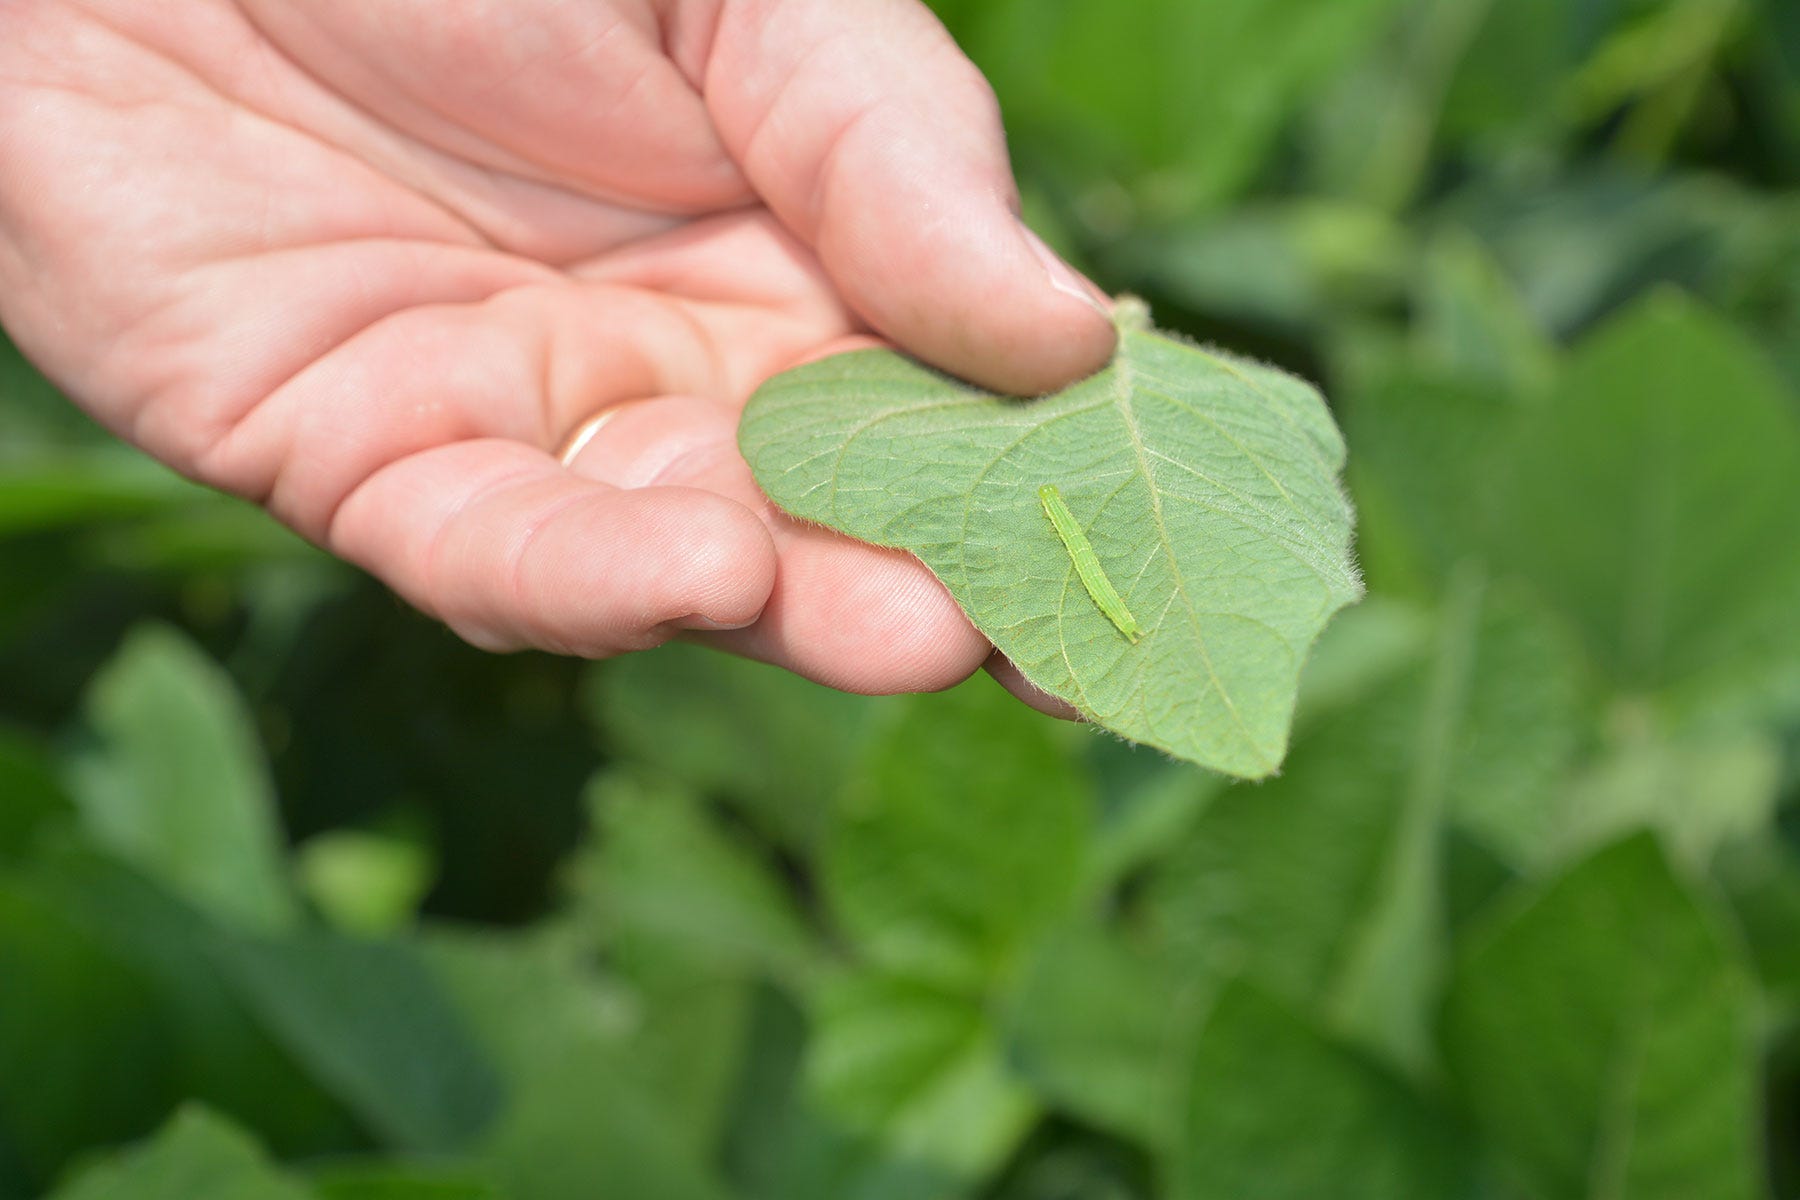 close-up of hand holding a soybean leaf with a small, light-green worm on it